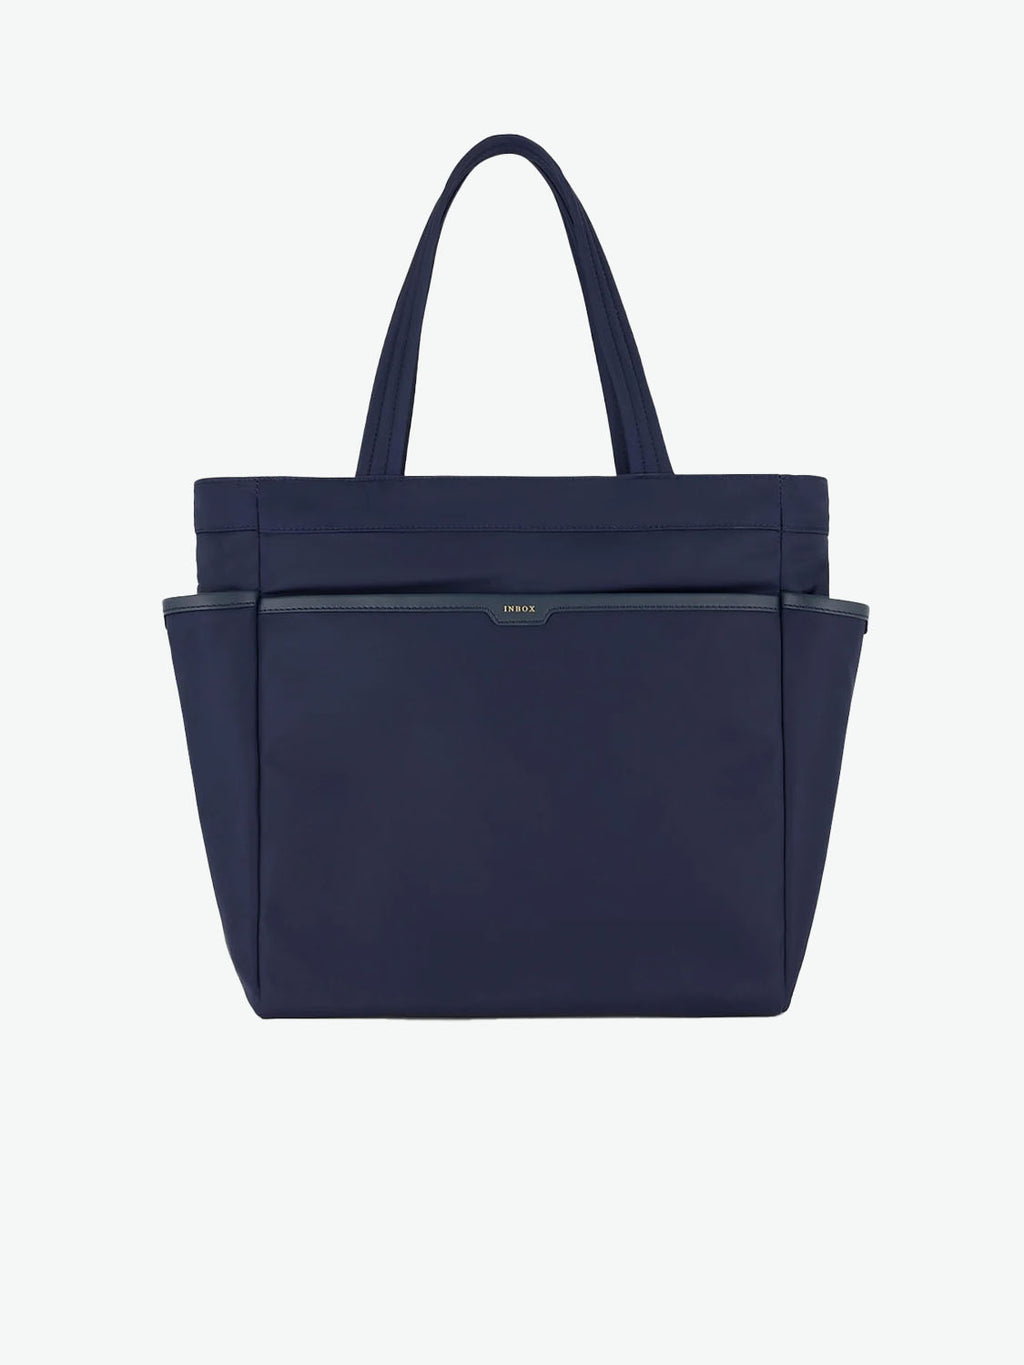 Anya Hindmarch Commuter Tote